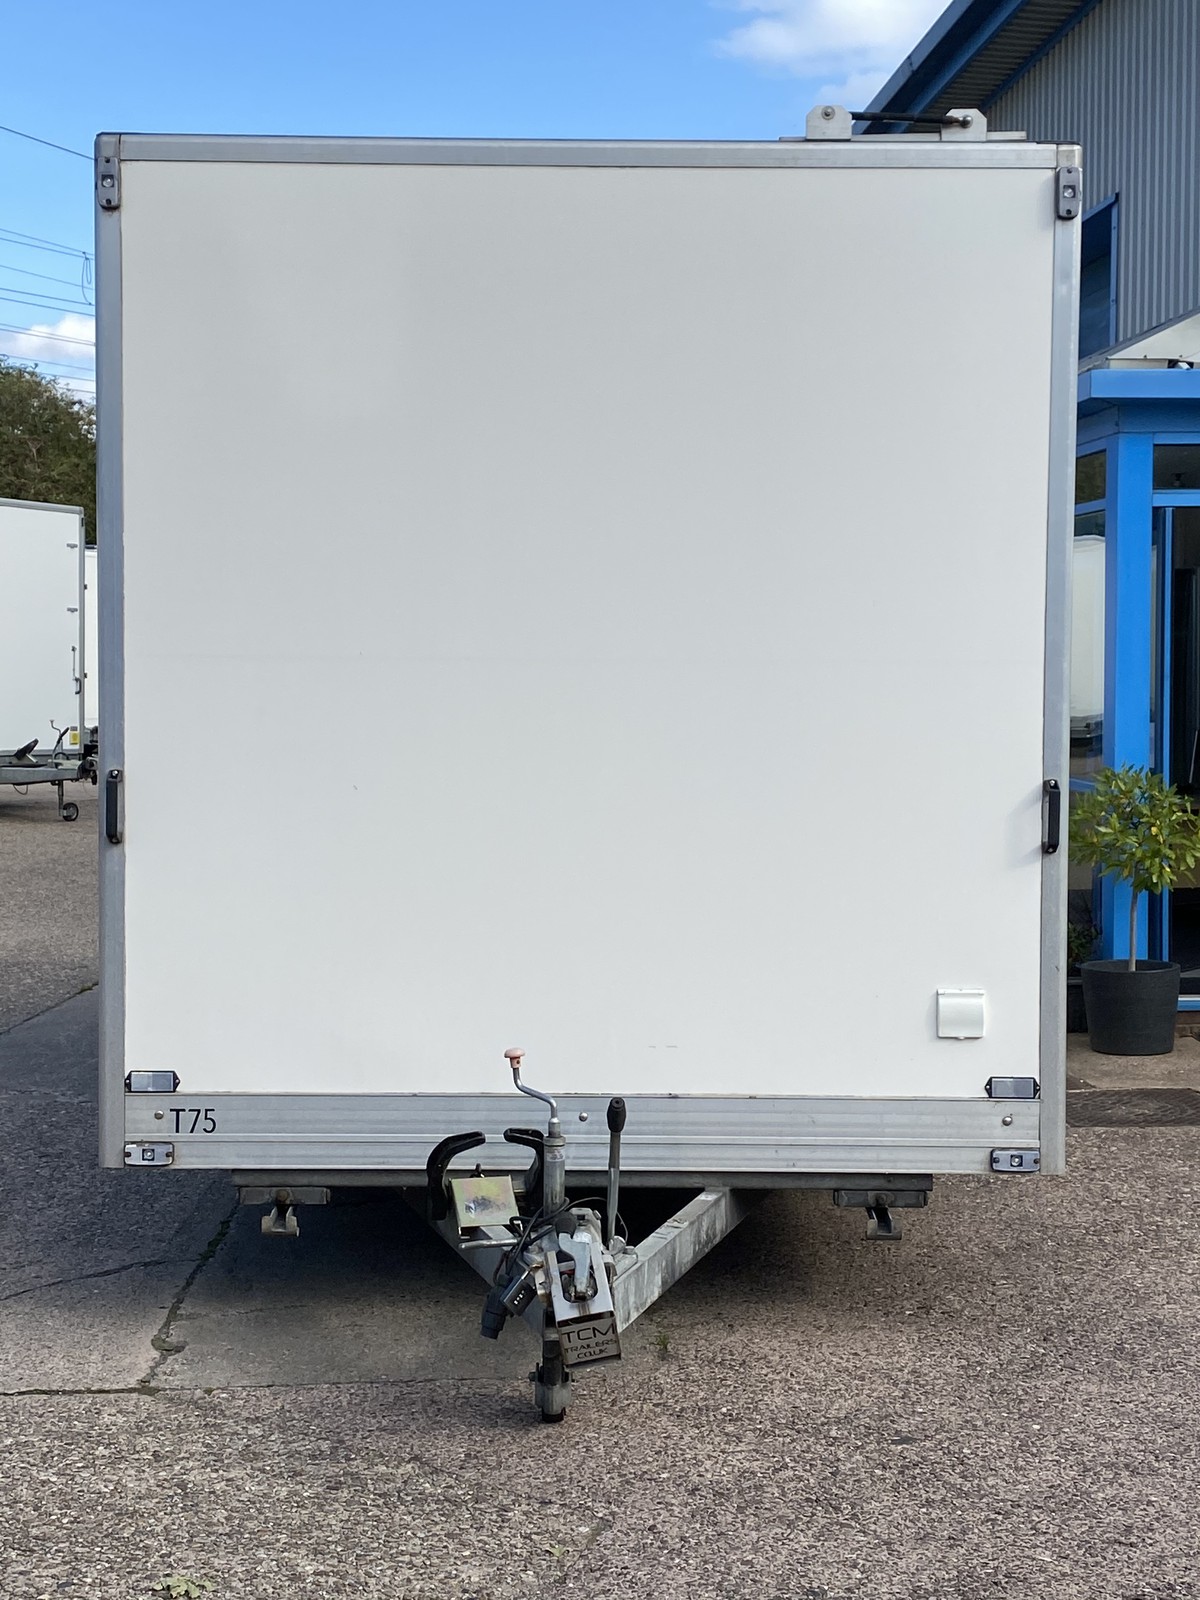 Secondhand Trailers | General Purpose | Mobile Site Office ...